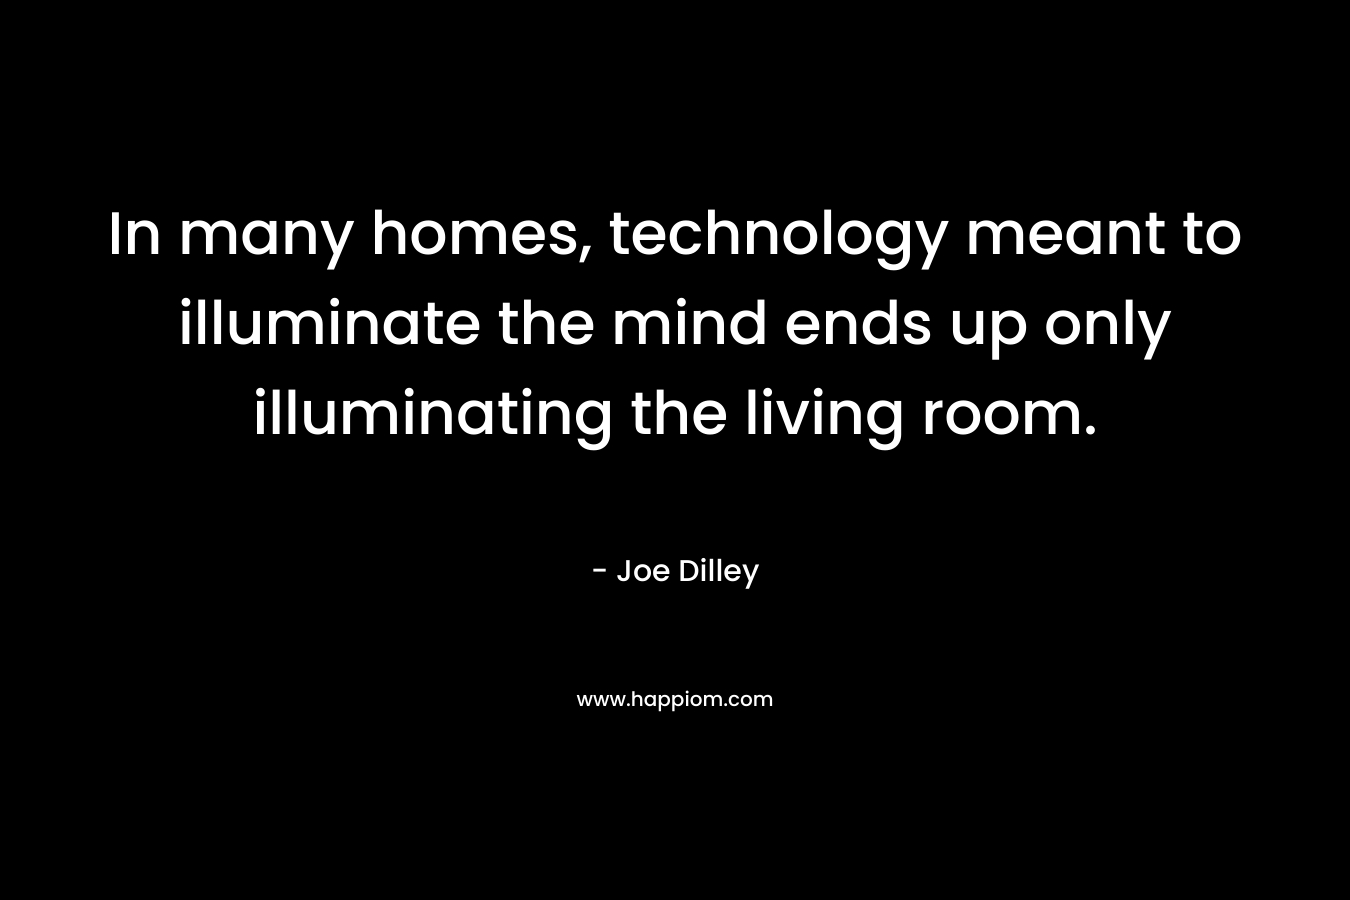 In many homes, technology meant to illuminate the mind ends up only illuminating the living room. – Joe Dilley